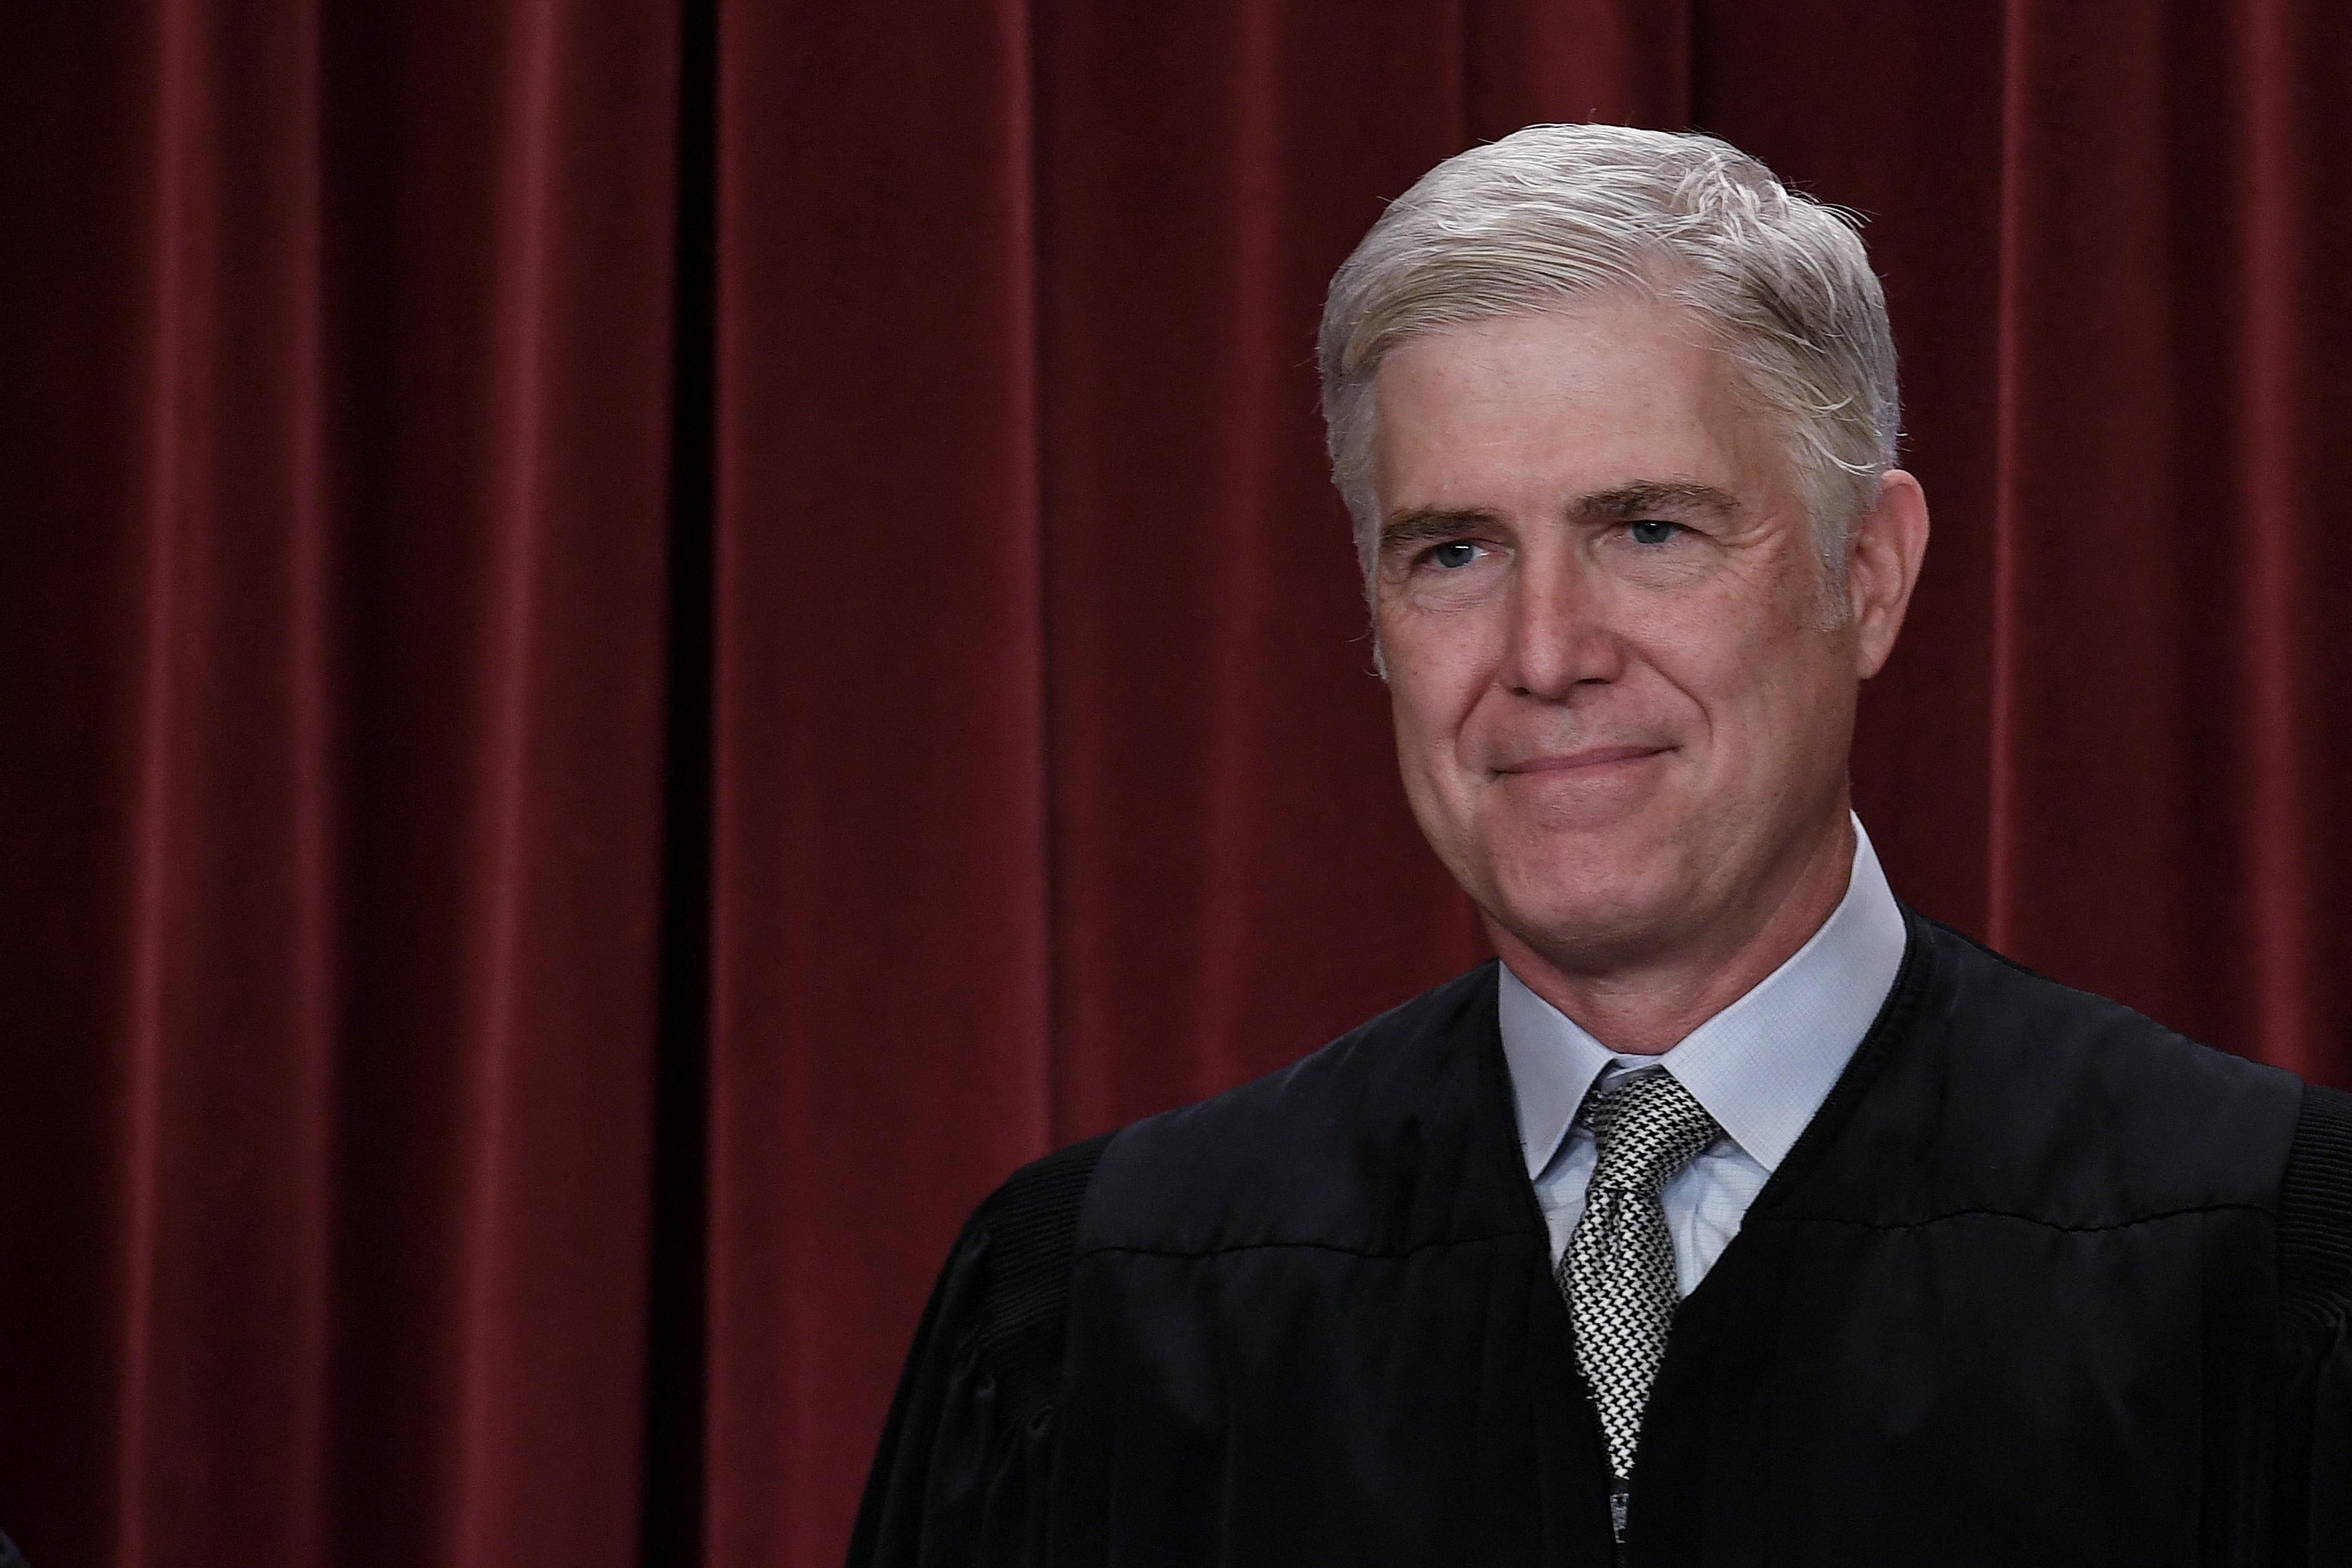 Justice Neil Gorsuch in his robe in front of a red curtain